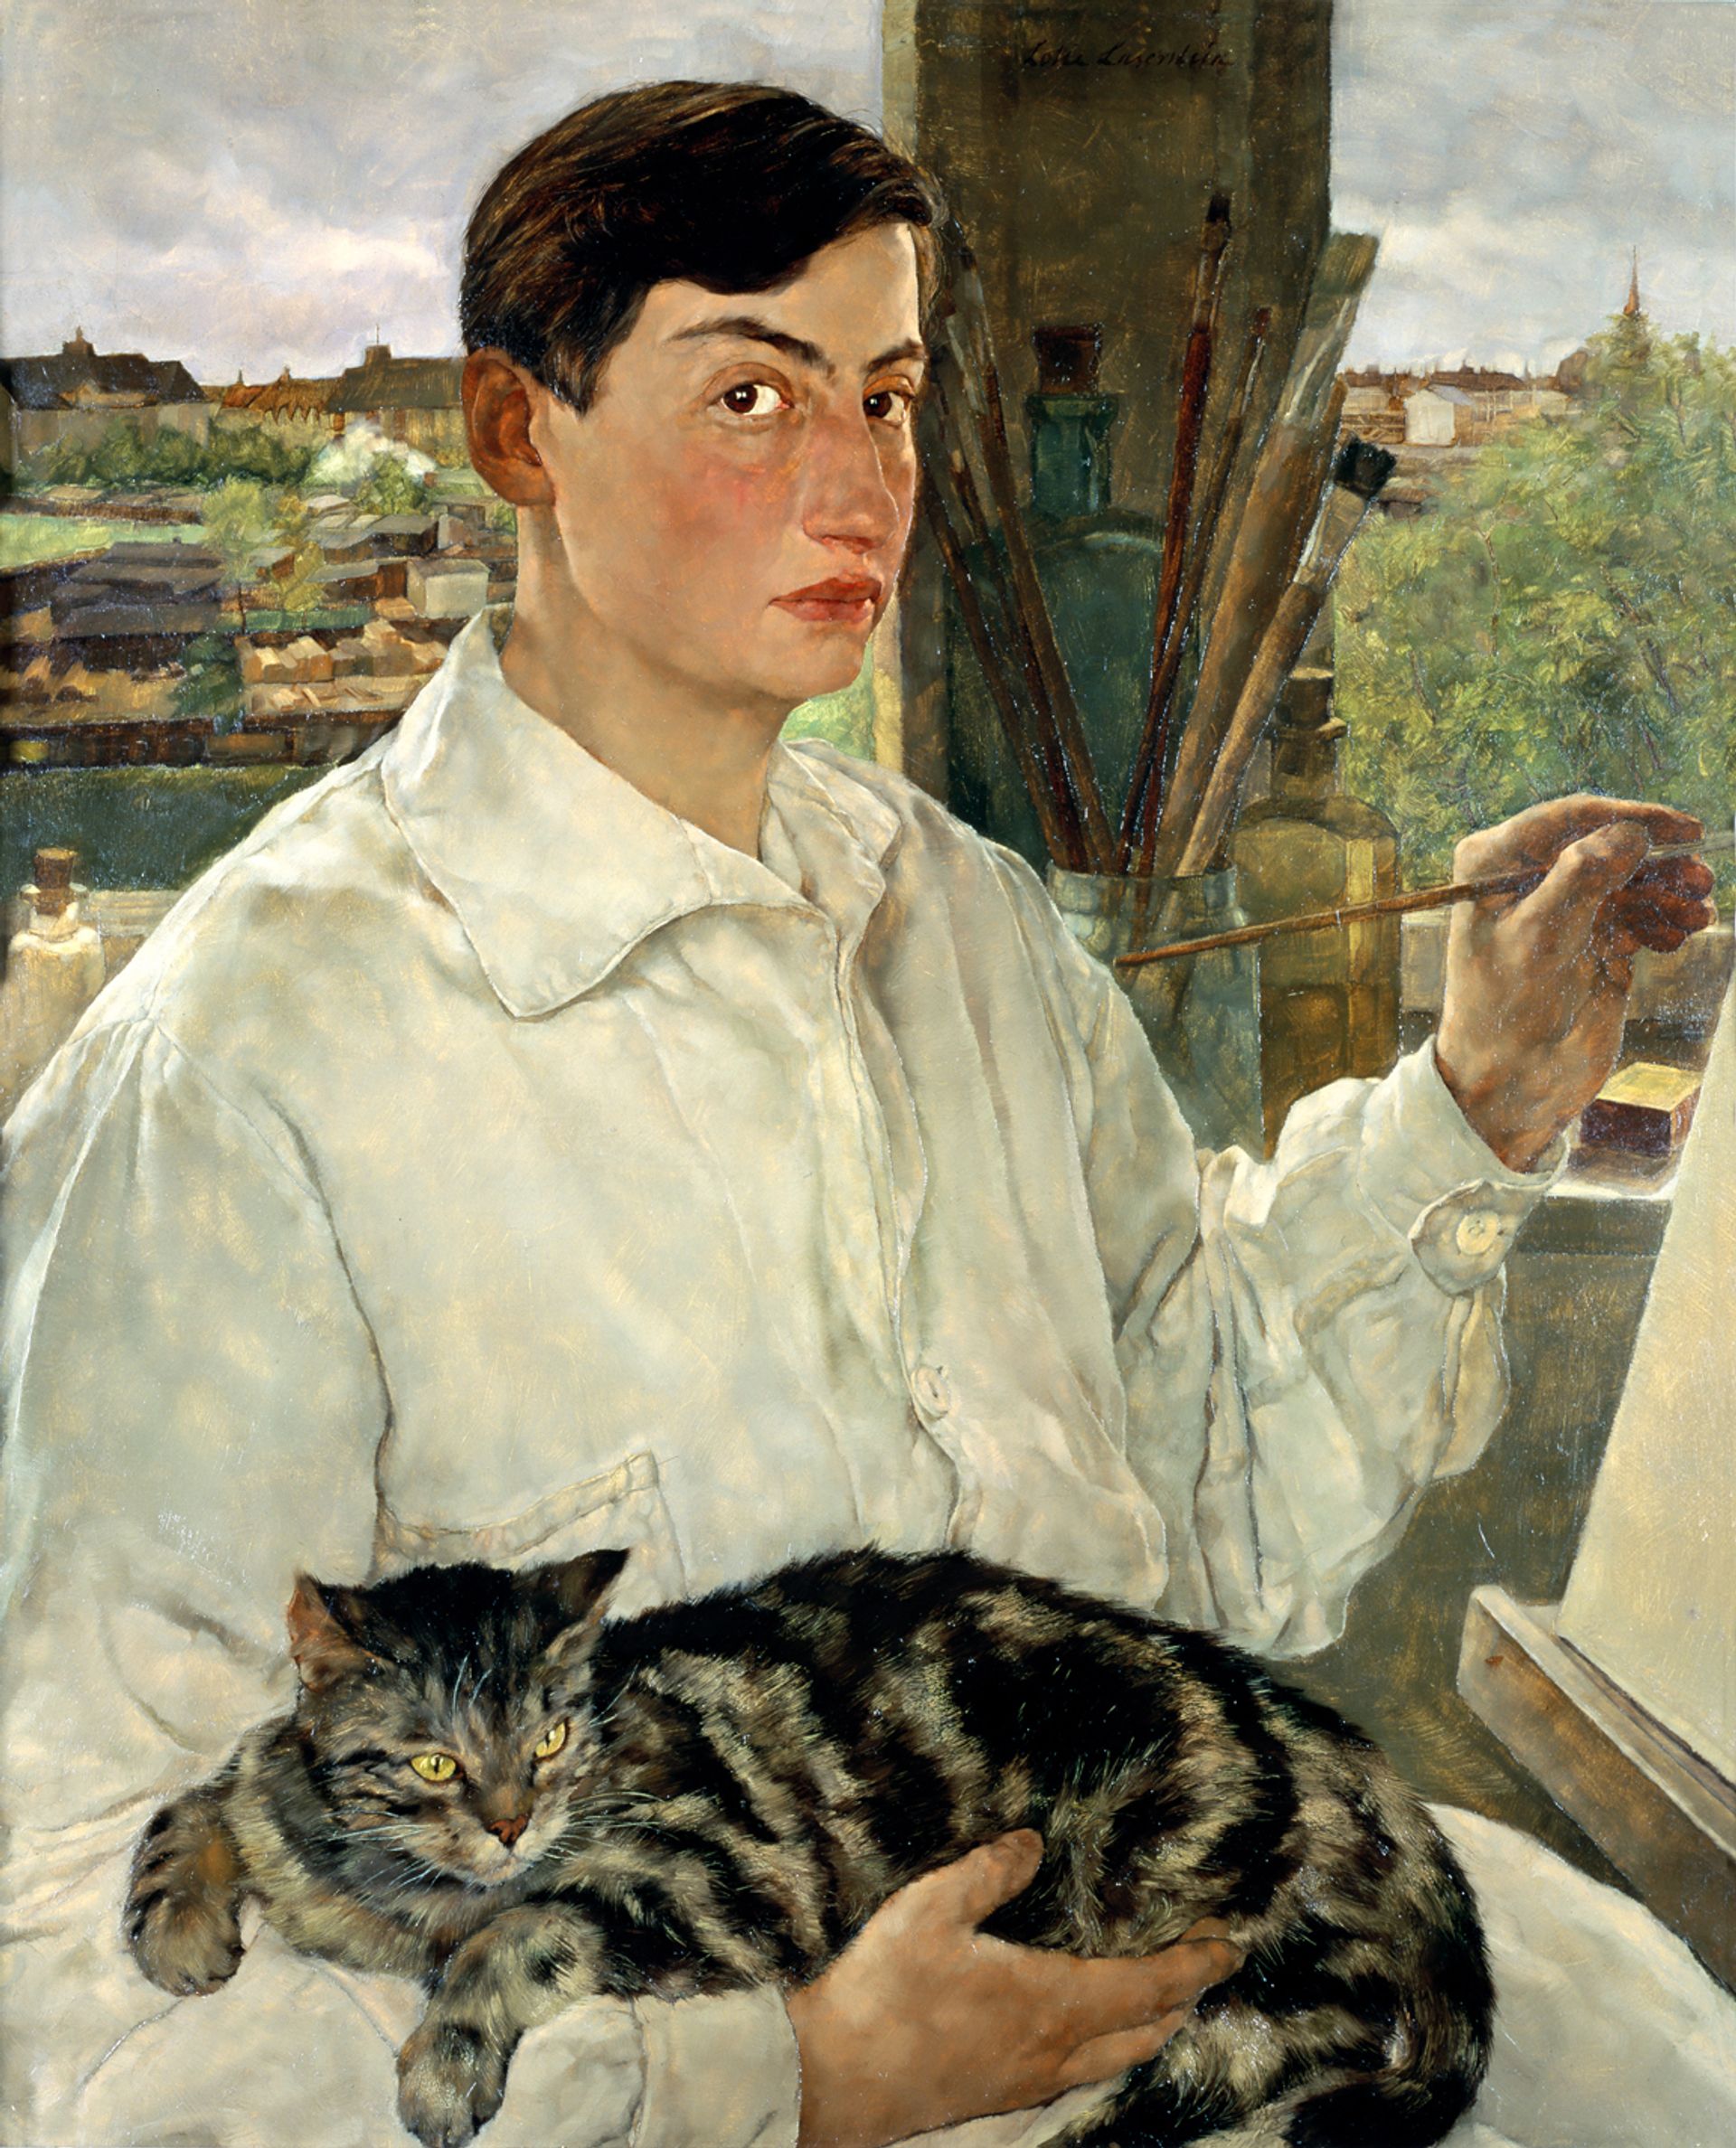 Lotte Laserstein's Self-portrait with Cat (1928). Lasterstein was one of over 150 female artists that the Verborgene Museum promoted through exhibitions and research © VG Bild-Kunst, Bonn 2019